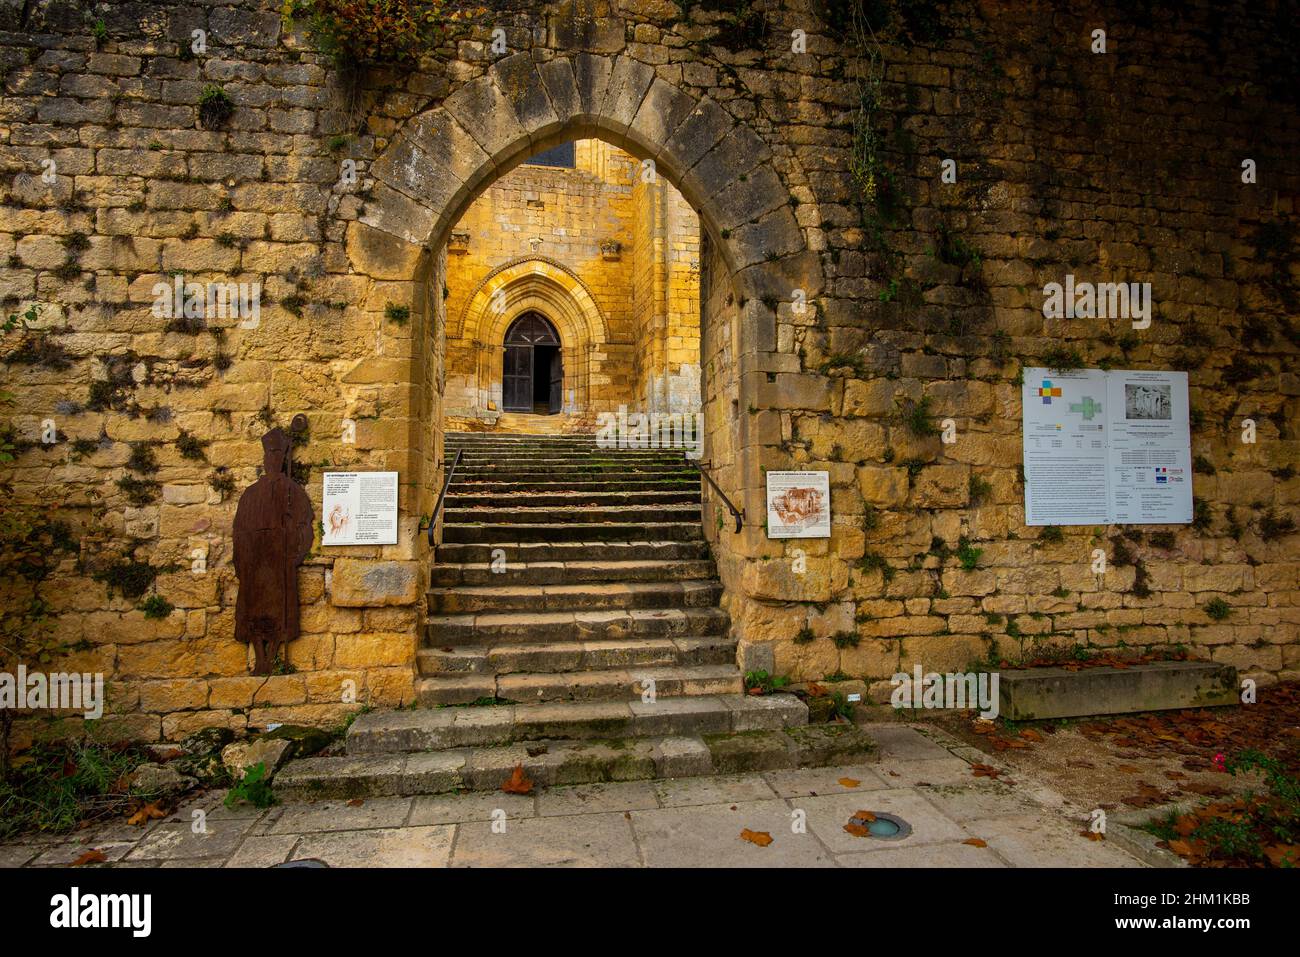 Coly-Saint-Amand, France - November 5, 2021: the access gate to the fortified church with some touristic information panels, but with no people Stock Photo